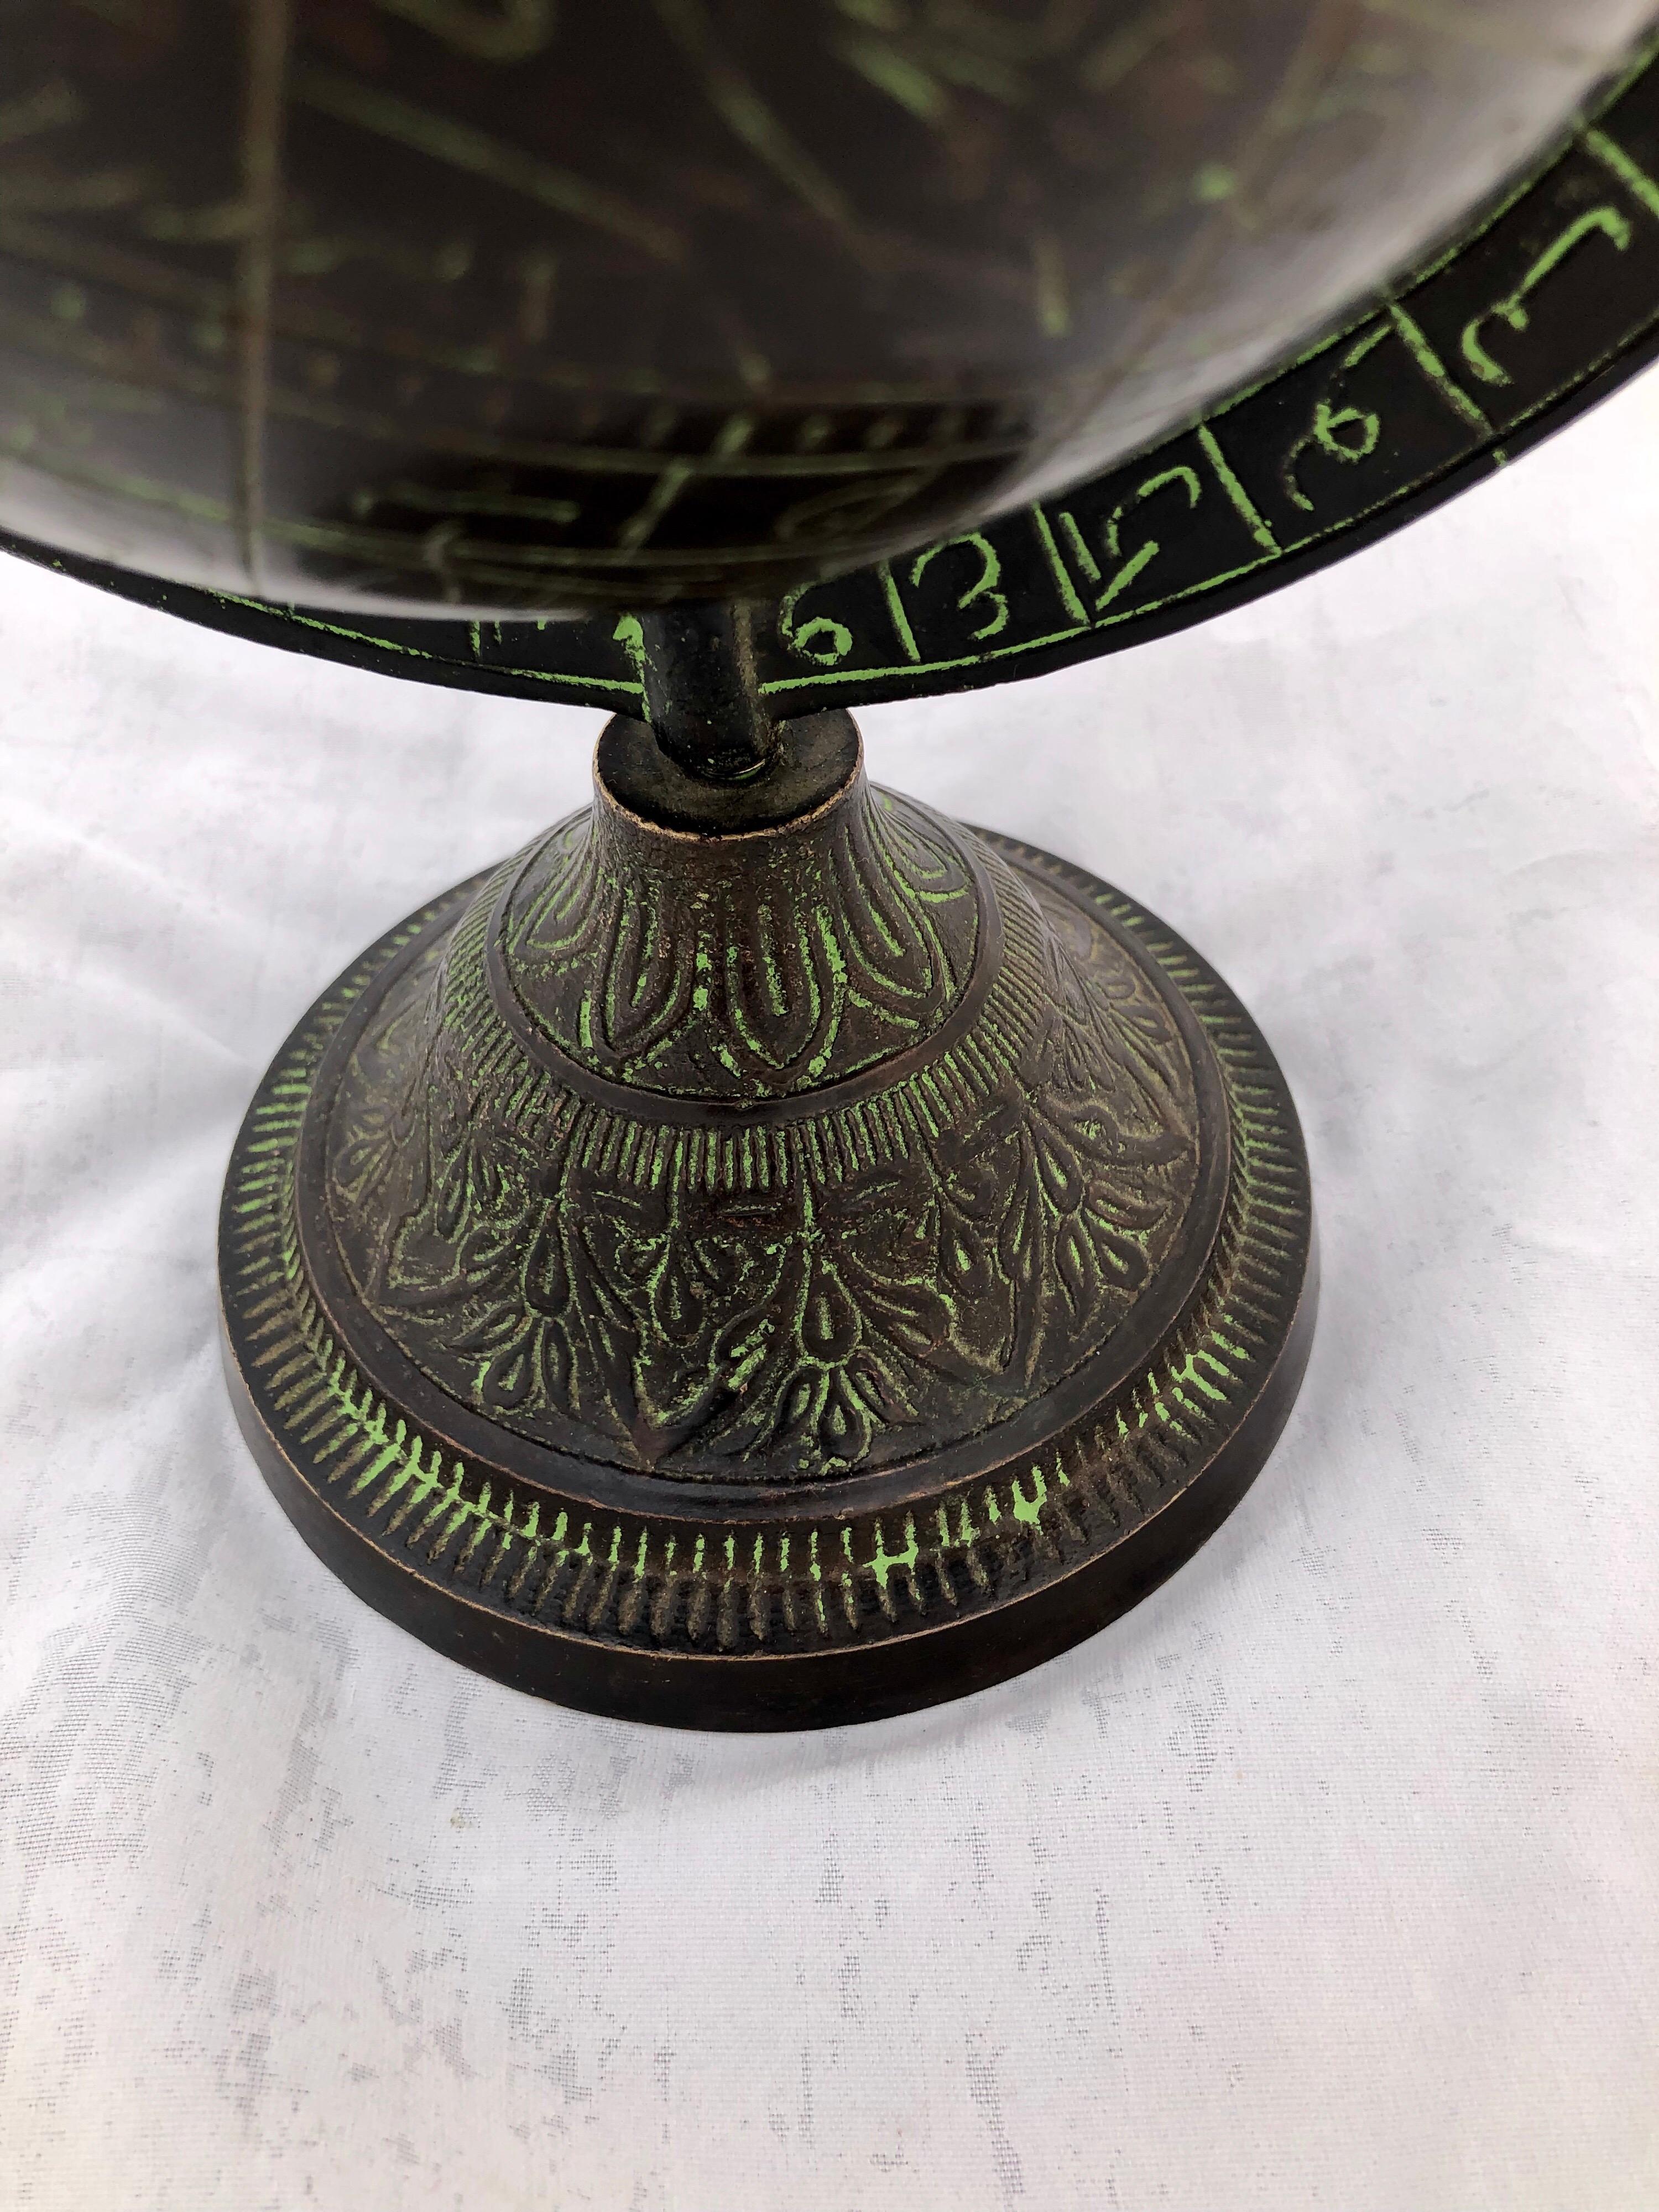 18th Century Islamic Astrolabe Sphere - Antique Bronze Celestial Globe  In Good Condition For Sale In Vineyard Haven, MA